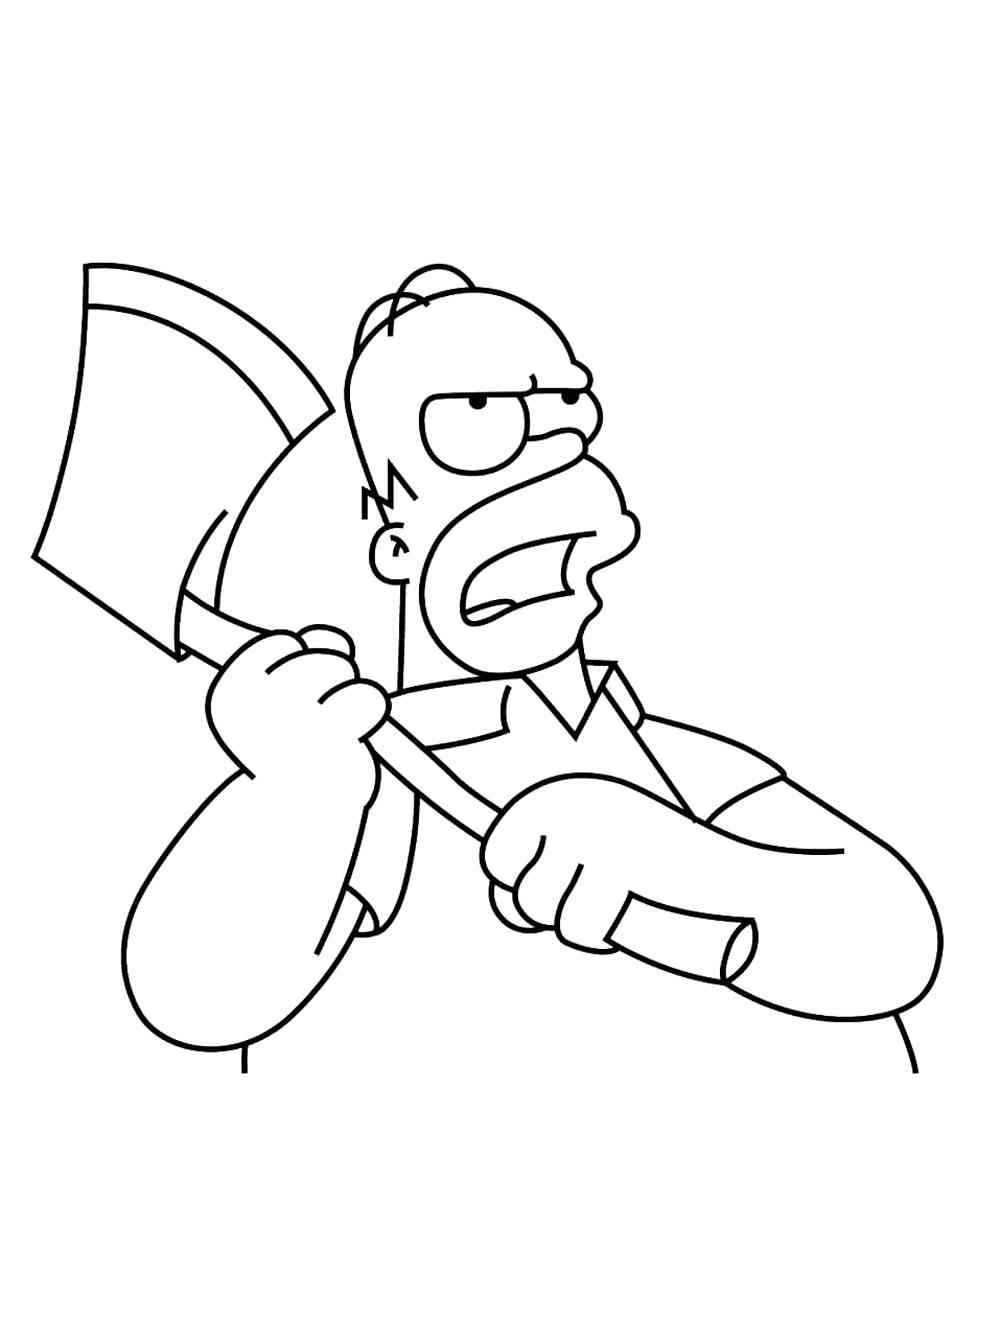 Homer Simpson 16 coloring page